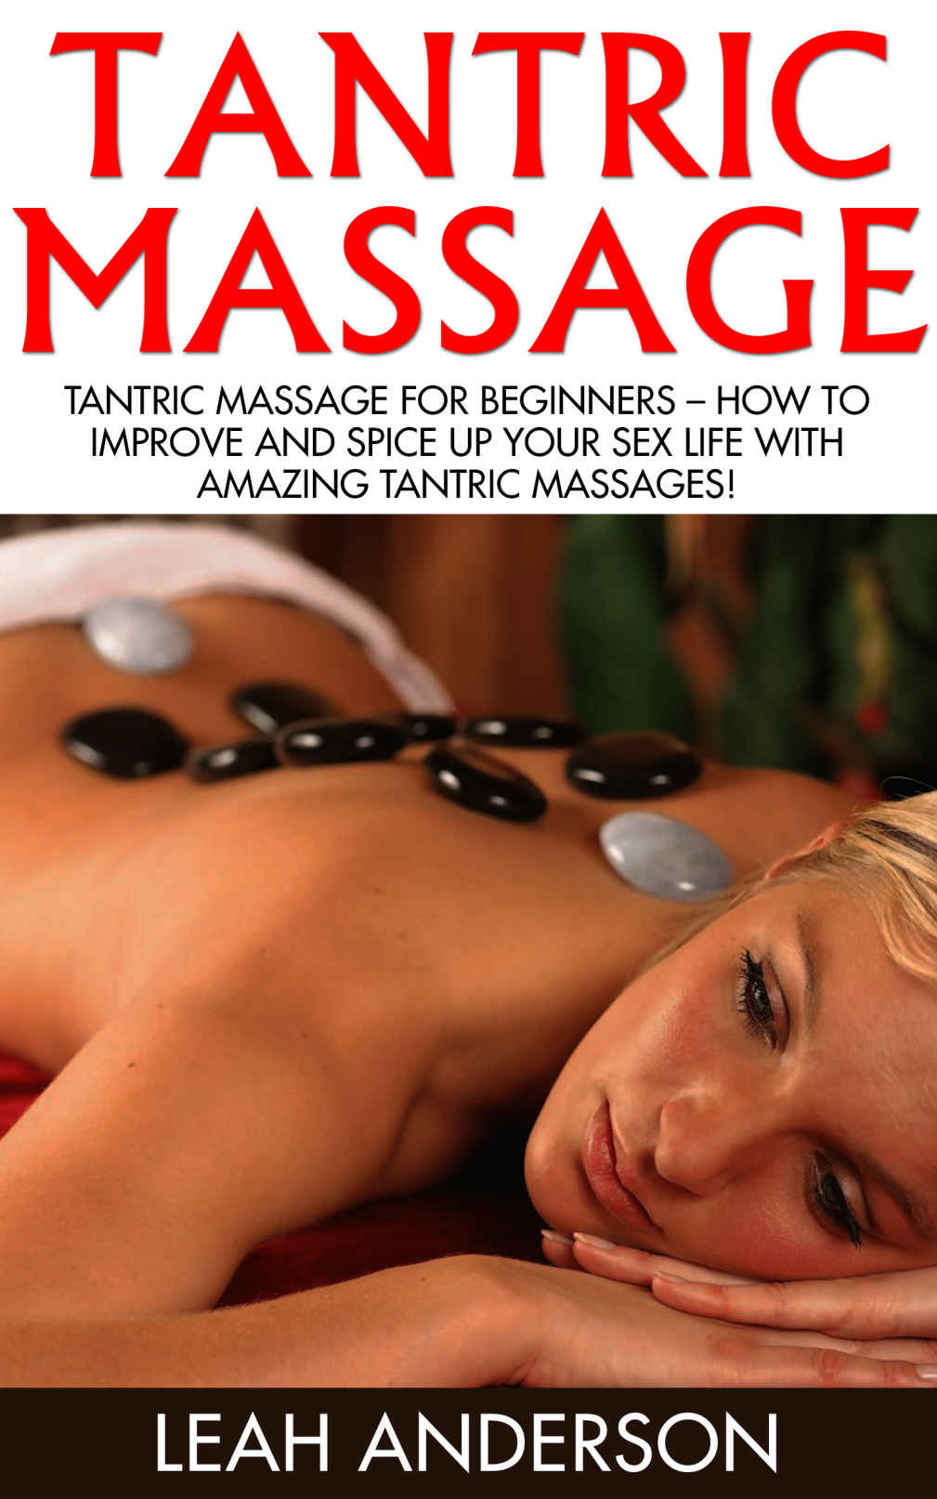 Tantric Massage: Tantric Massage For Beginners – How To Improve And Spice Up Your Sex Life With Amazing Tantric Massages!